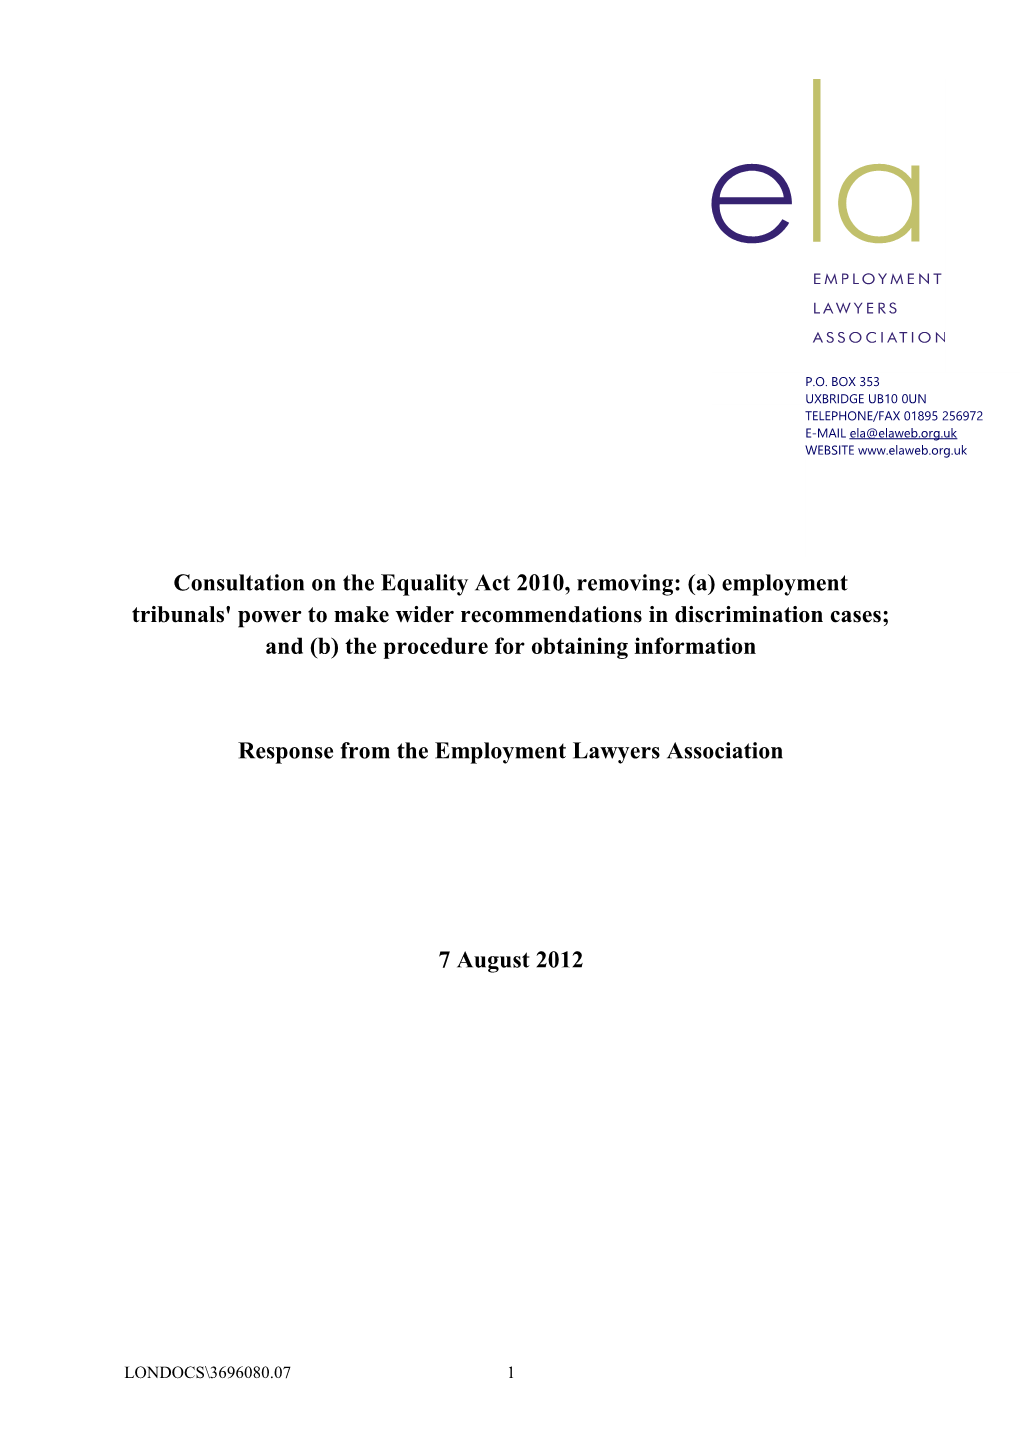 Response from the Employment Lawyers Association